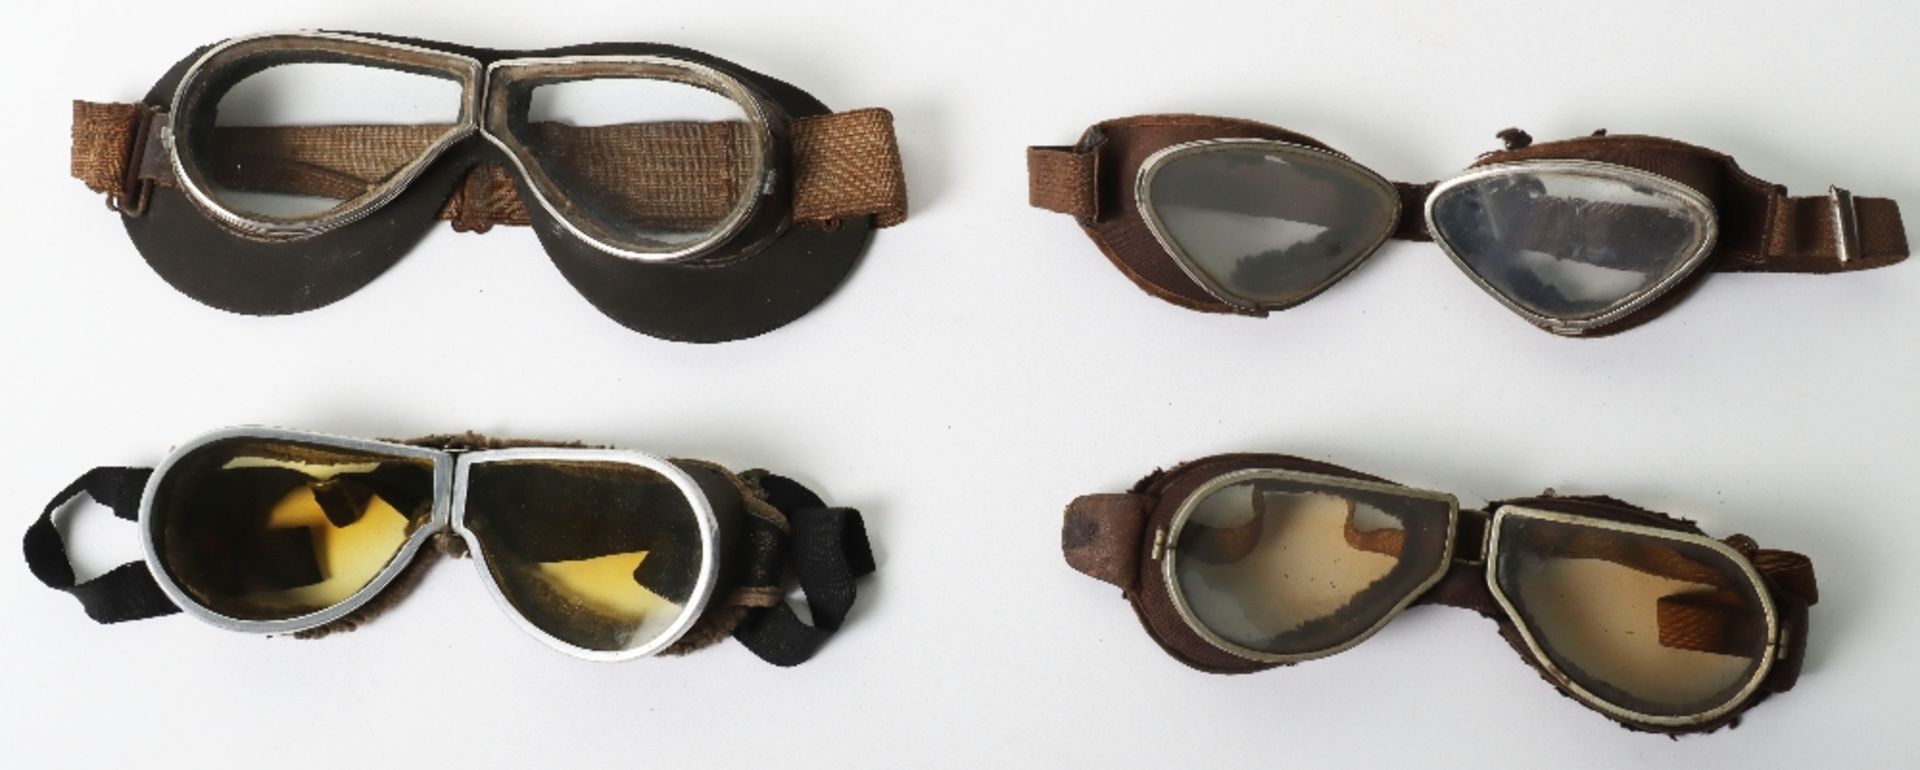 Four Pairs of Aviators Flying Goggles